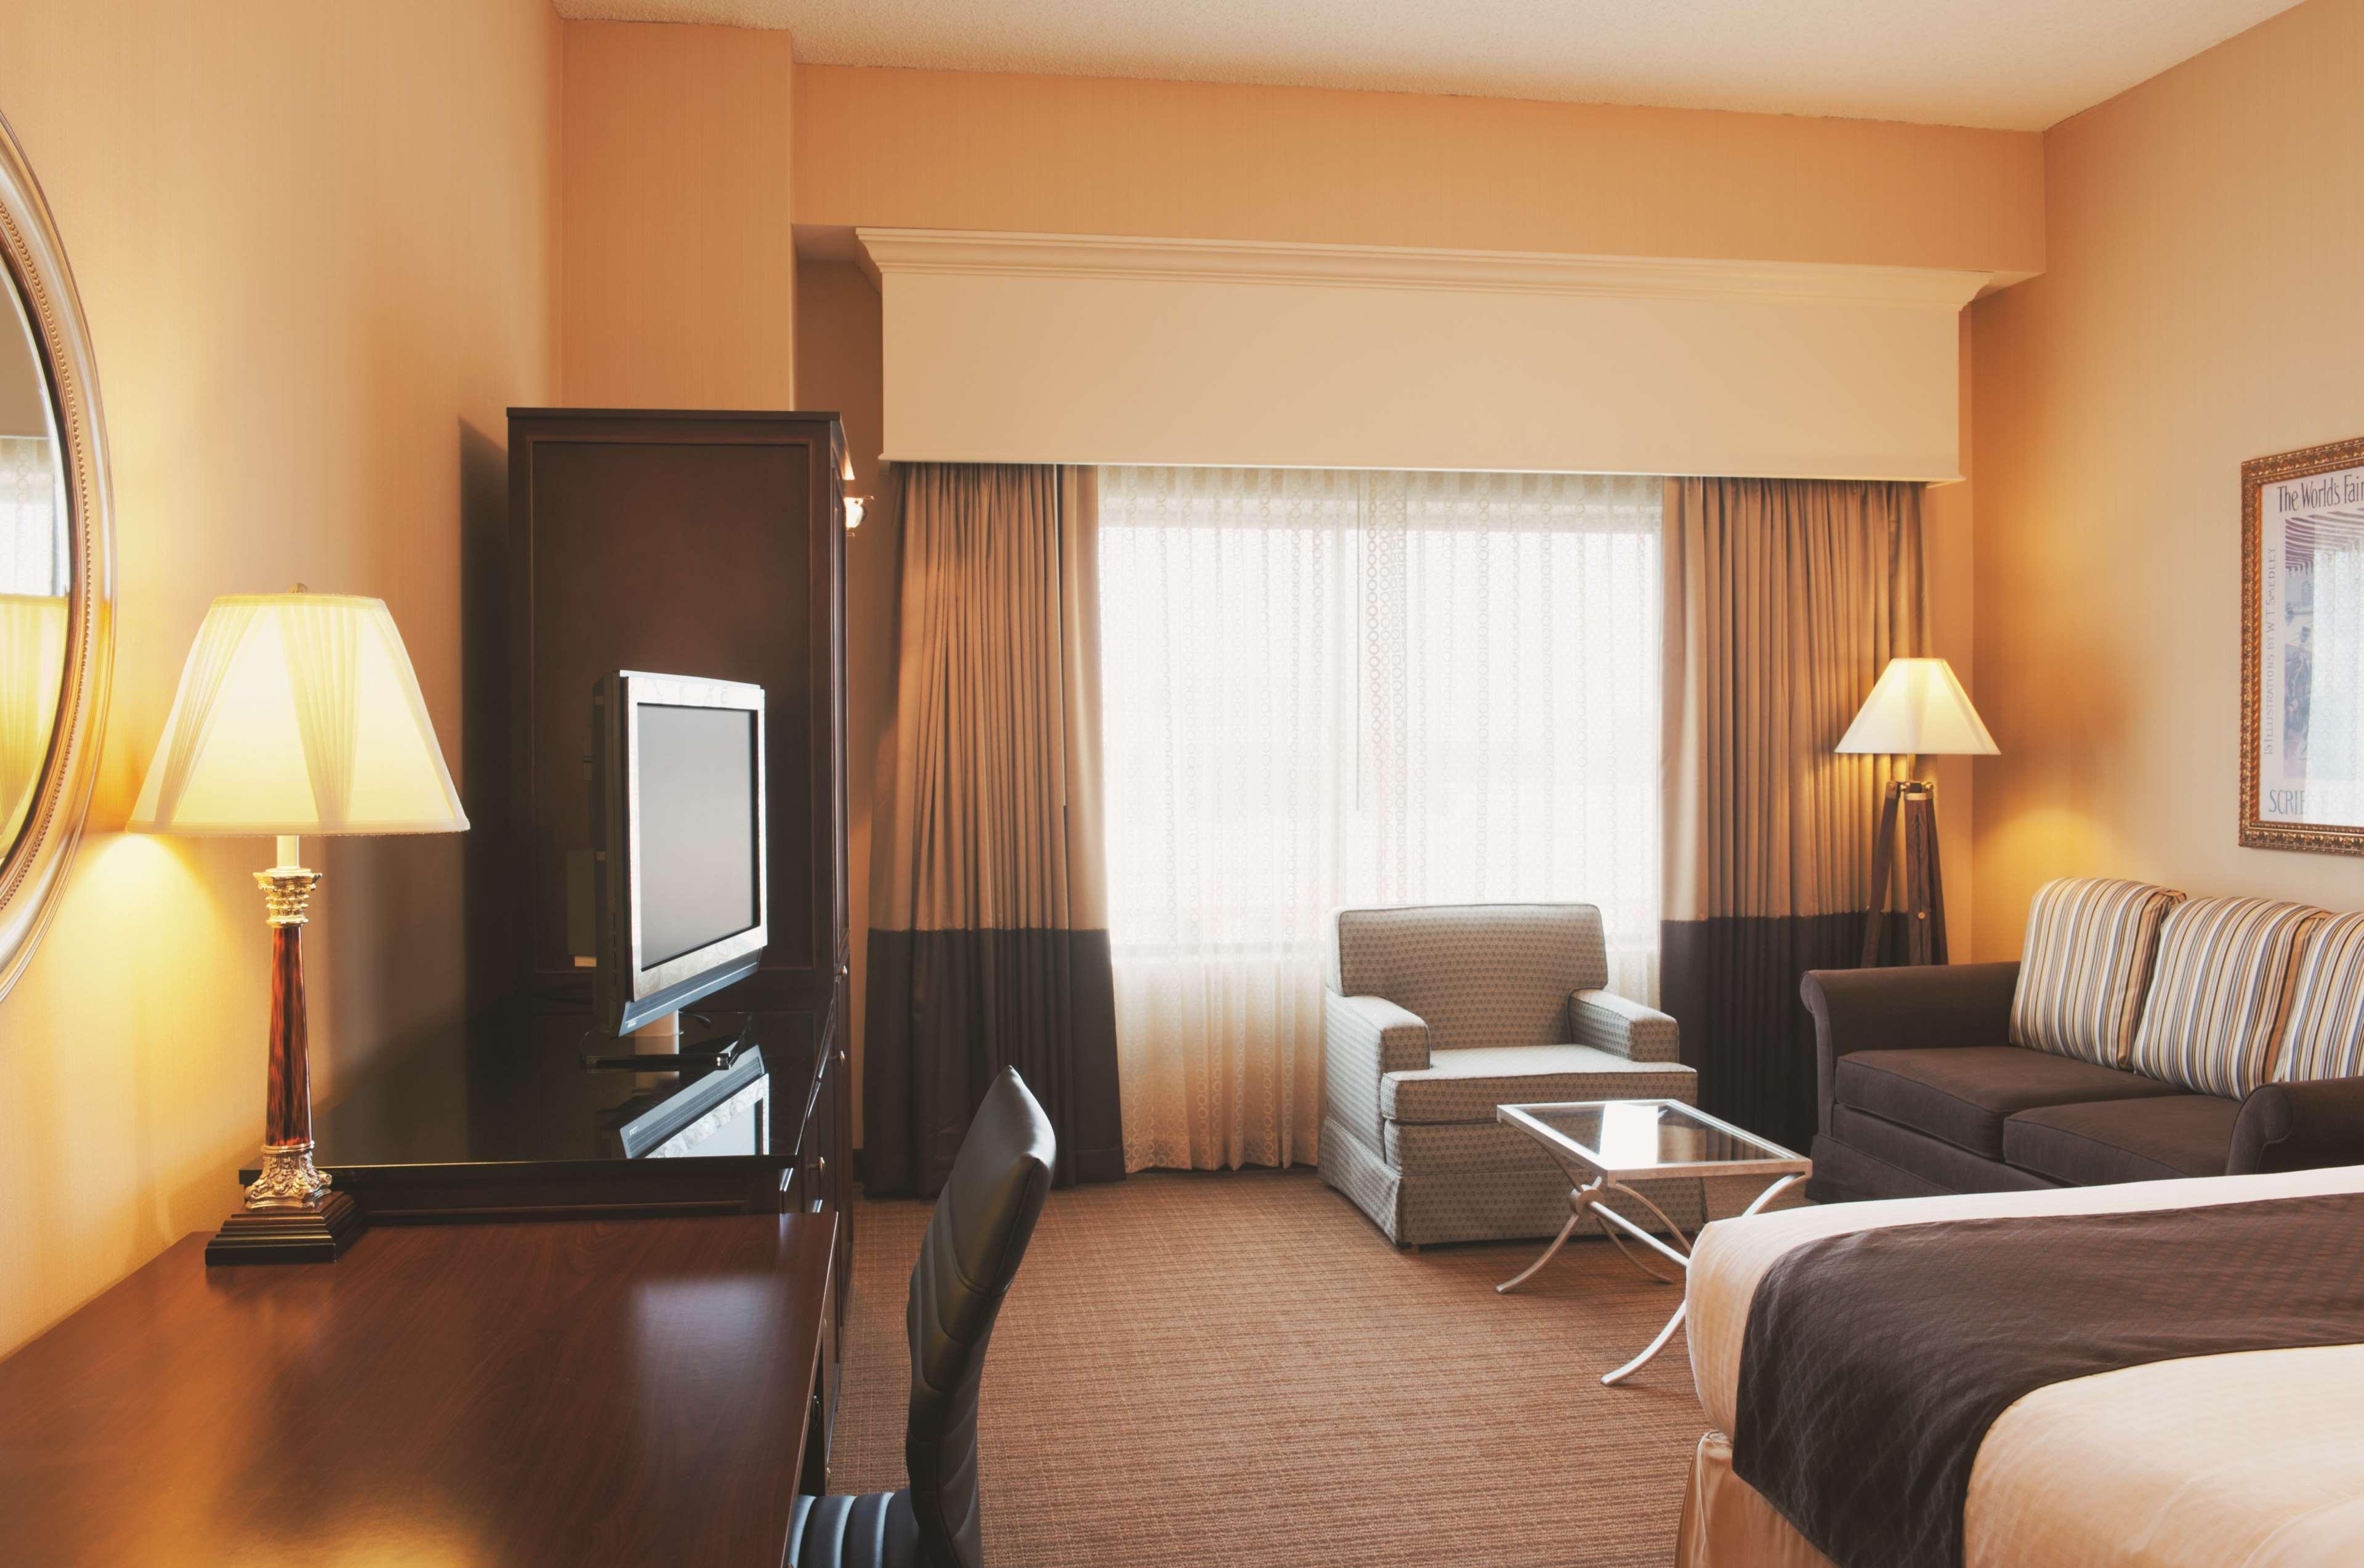 Hotel Doubletree By Hilton Chicago O'Hare Airport-Rosemont Zimmer foto